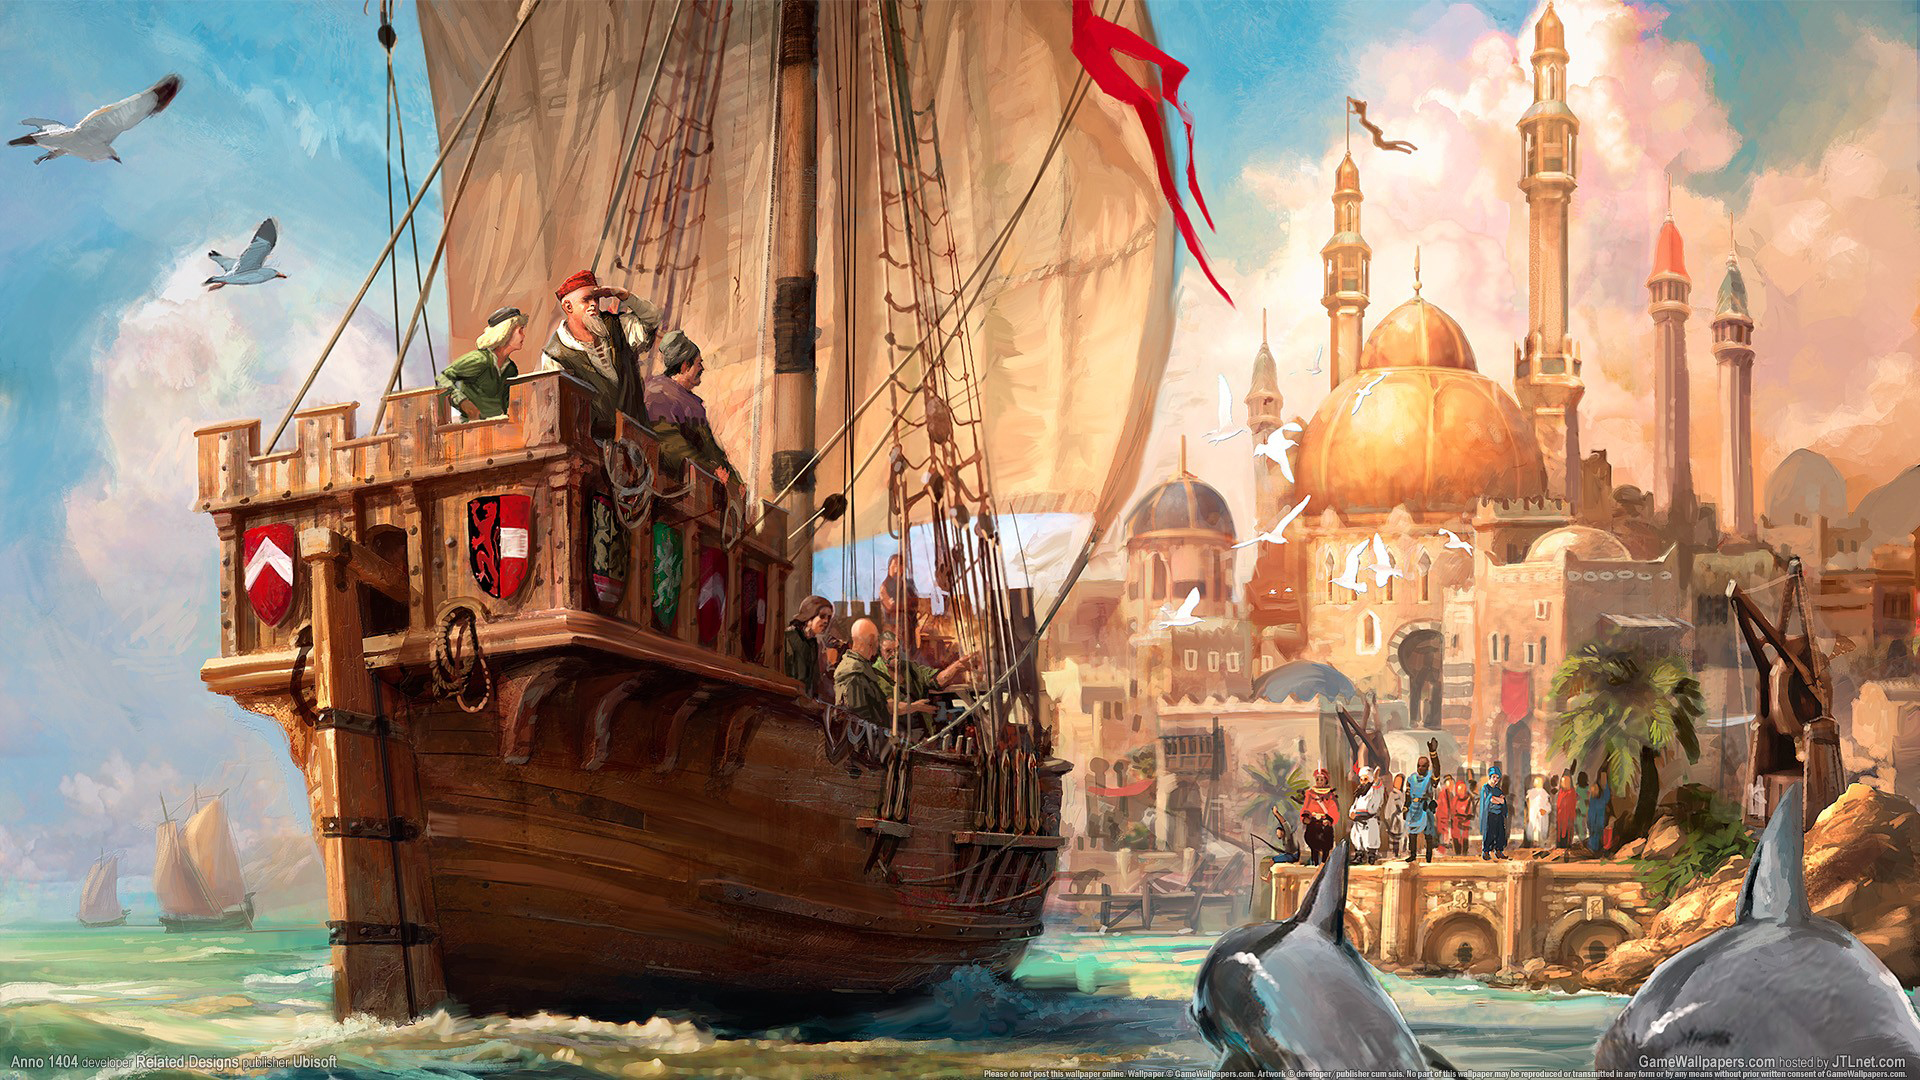 General 1920x1080 digital art fantasy art Anno 1404 video games sailing ship dolphin mosque coat of arms seagulls crowds ports PC gaming video game art ship vehicle